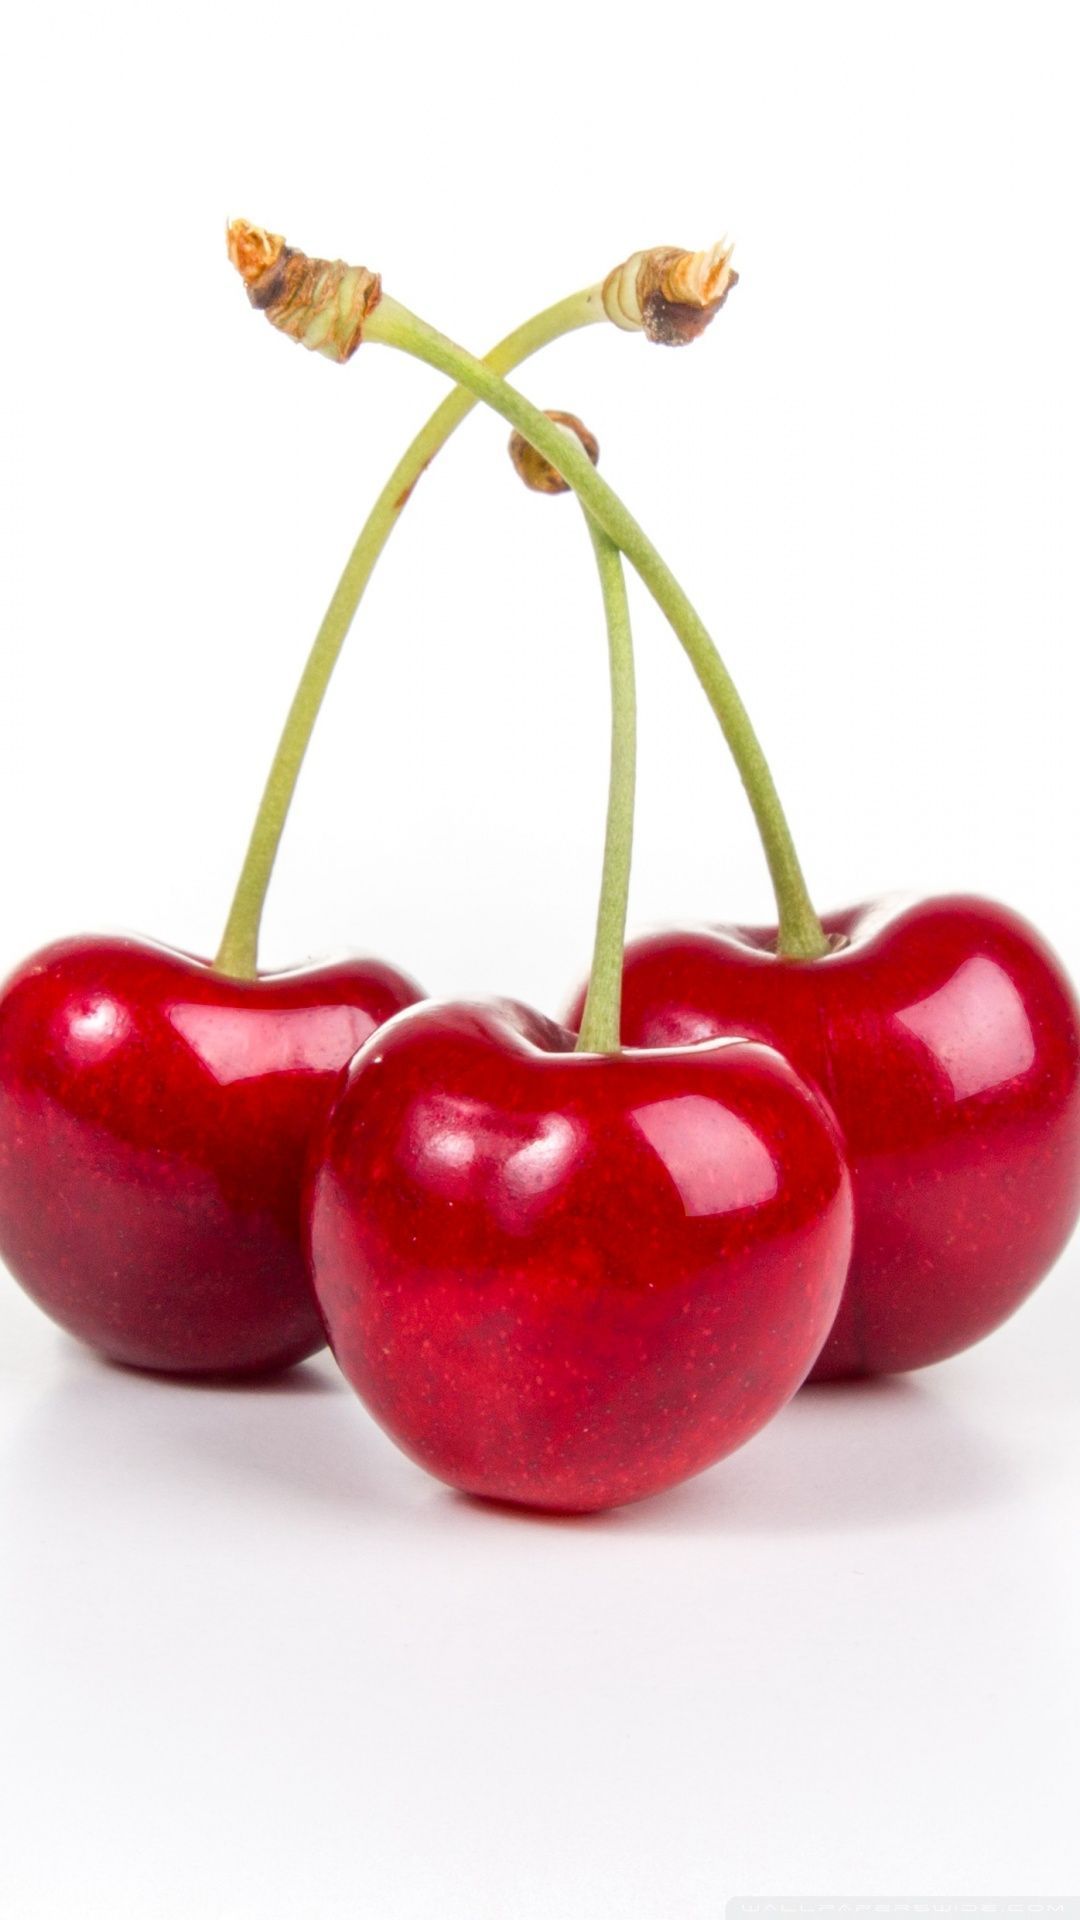 A group of three cherries on top - Fruit, cherry